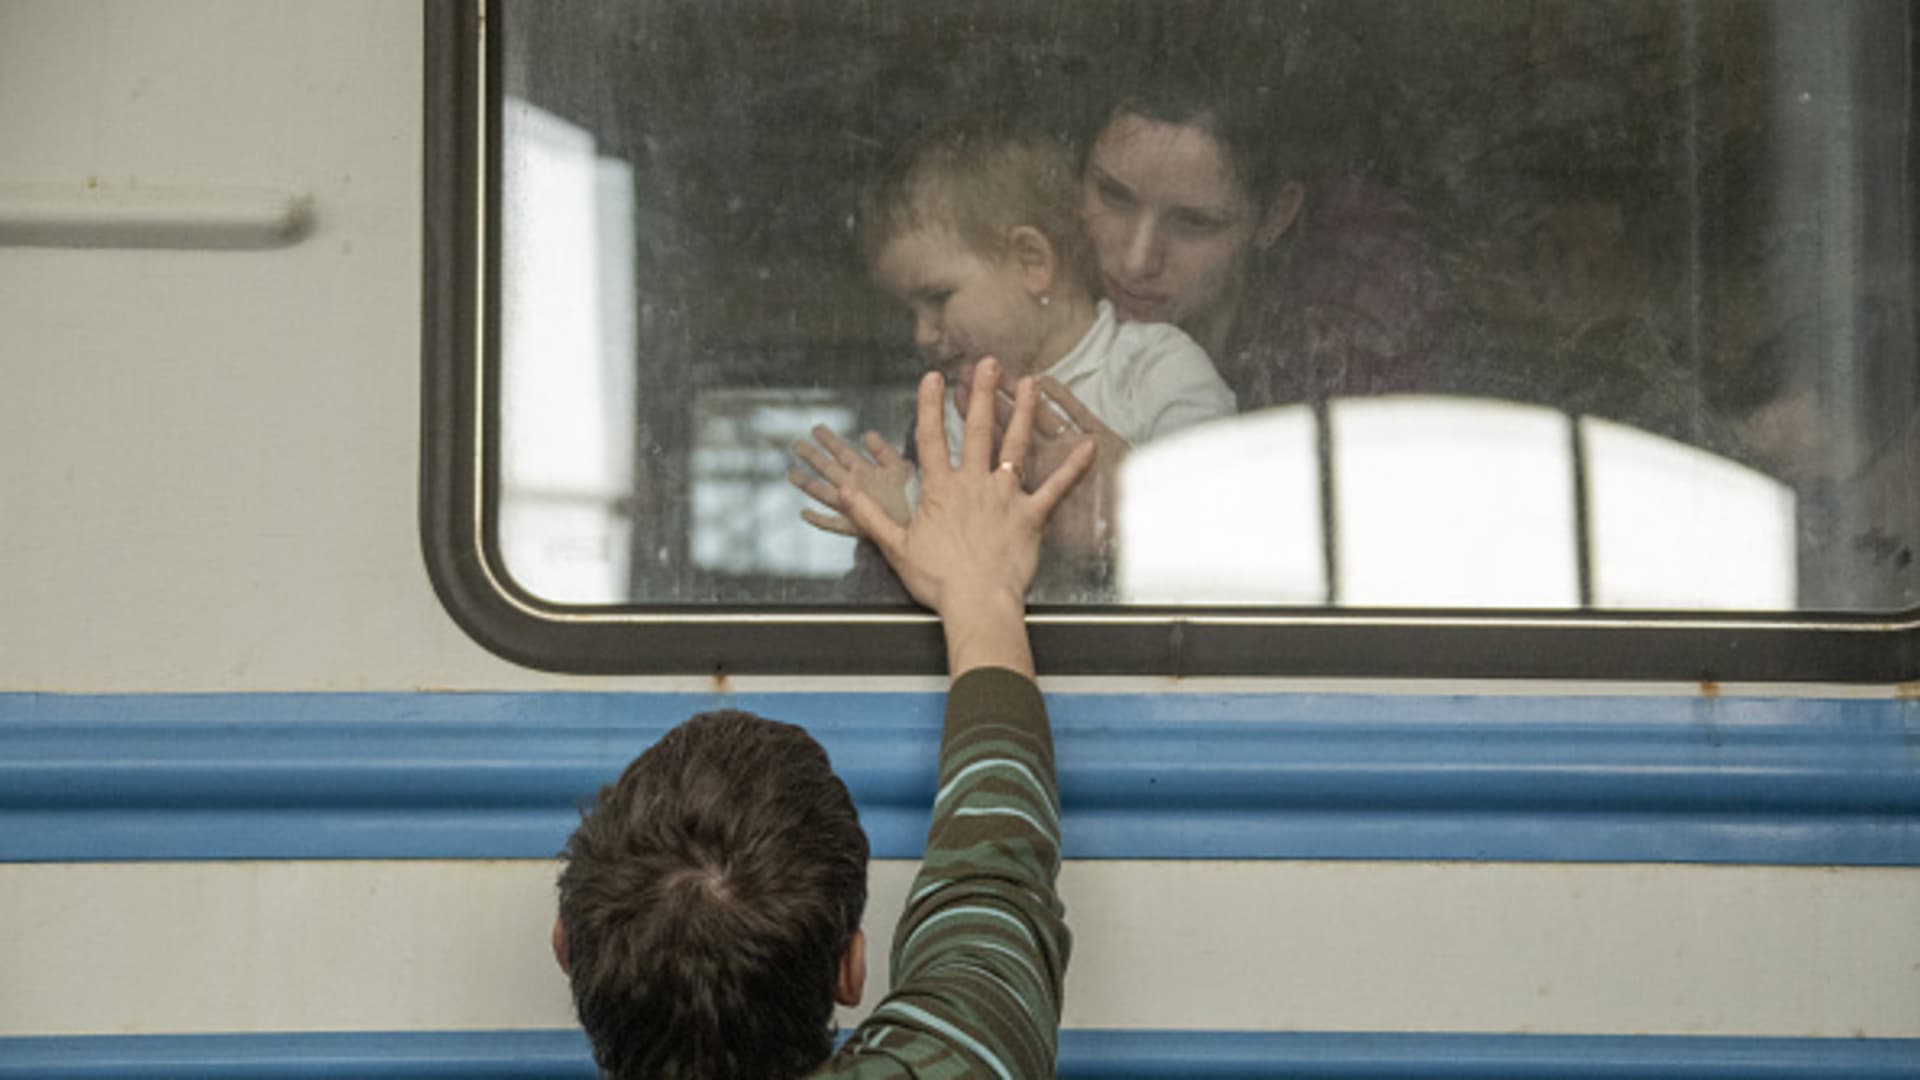 Ukrainian displaced civilians wait in the train station as they flee from the war in Lviv, Ukraine on March 15, 2022.